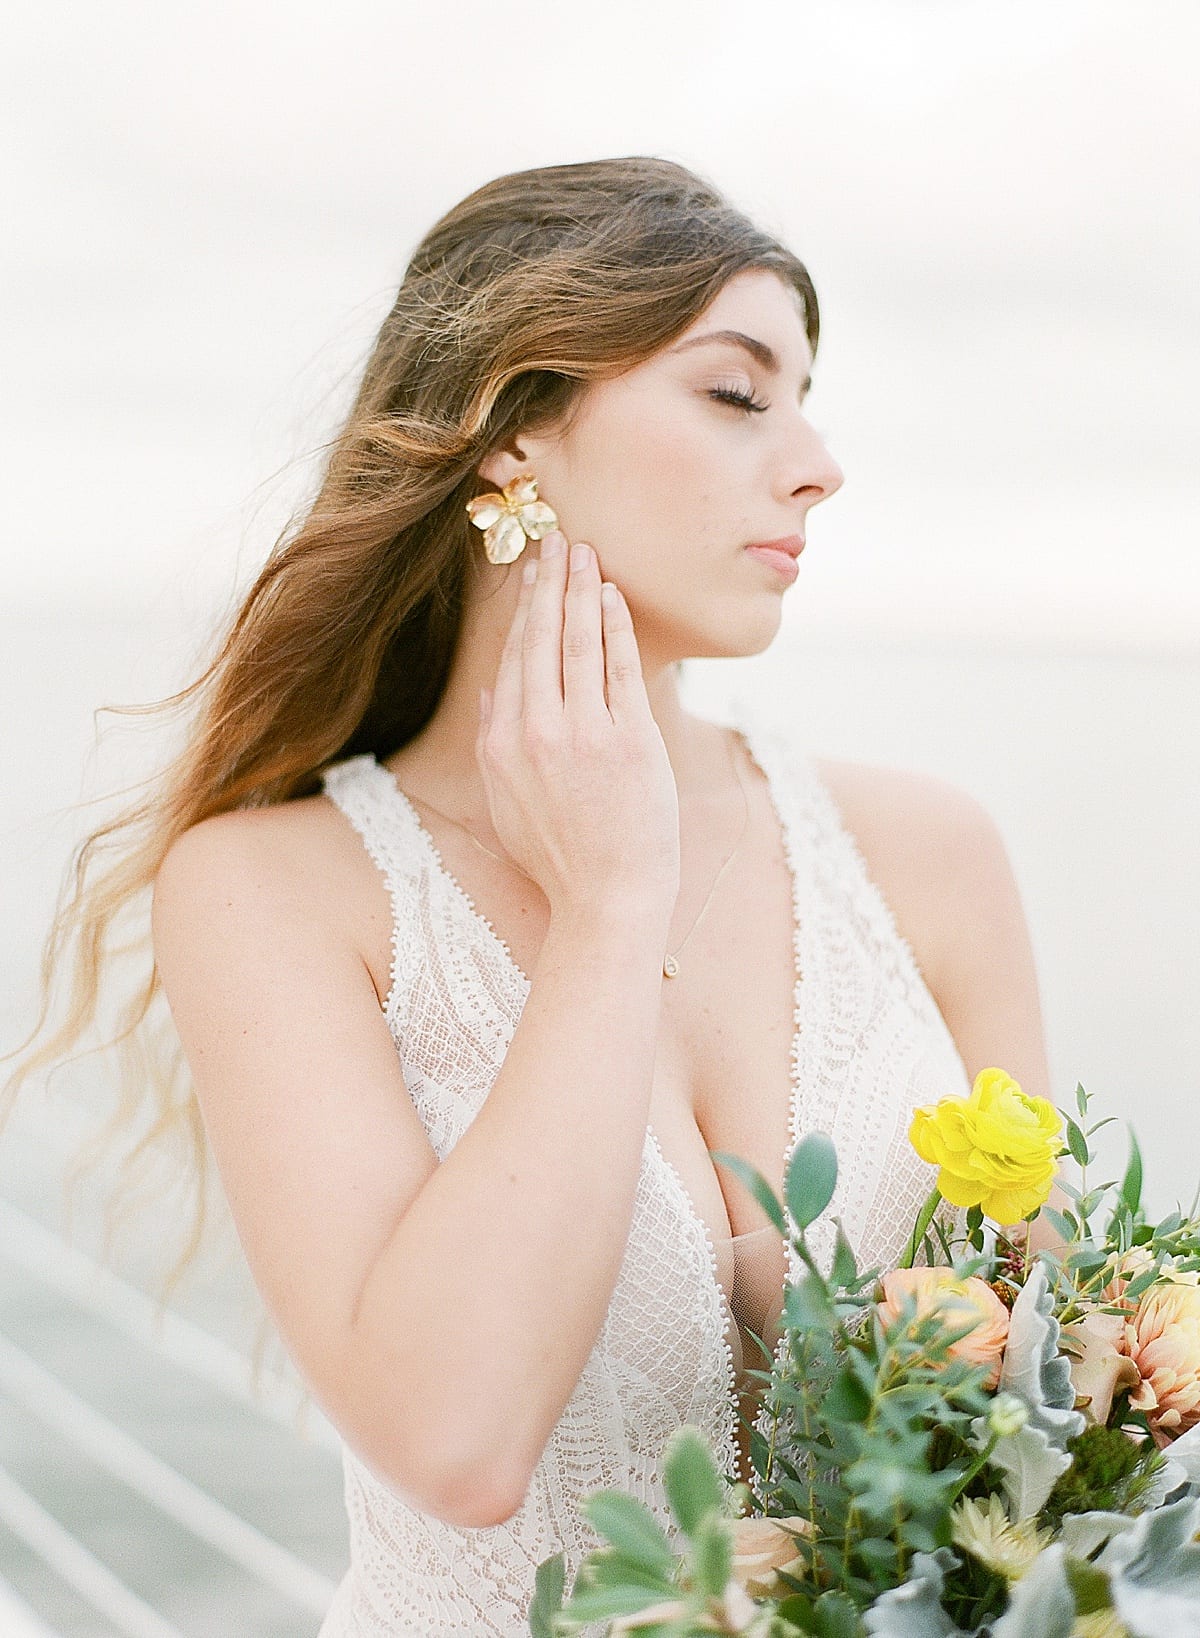 Profile of Bride Holding Bouquet with Eyes Closed Photo